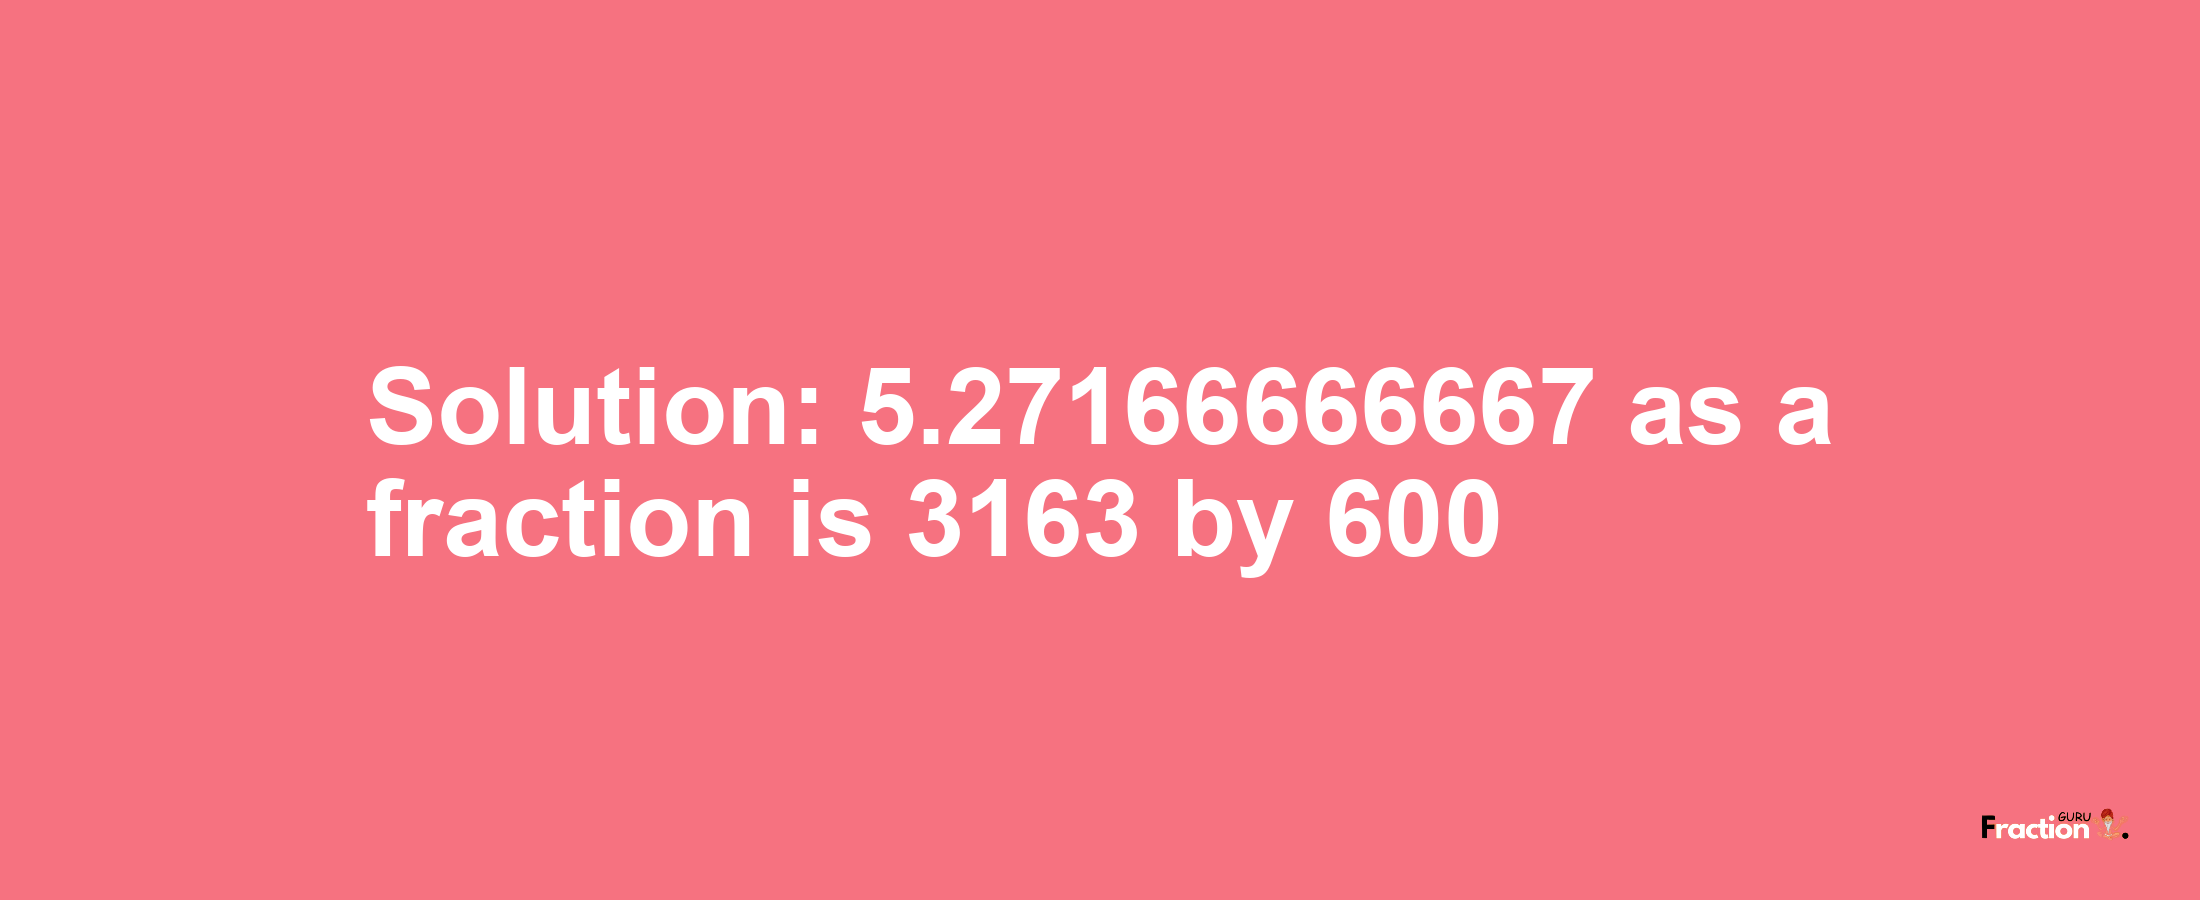 Solution:5.27166666667 as a fraction is 3163/600